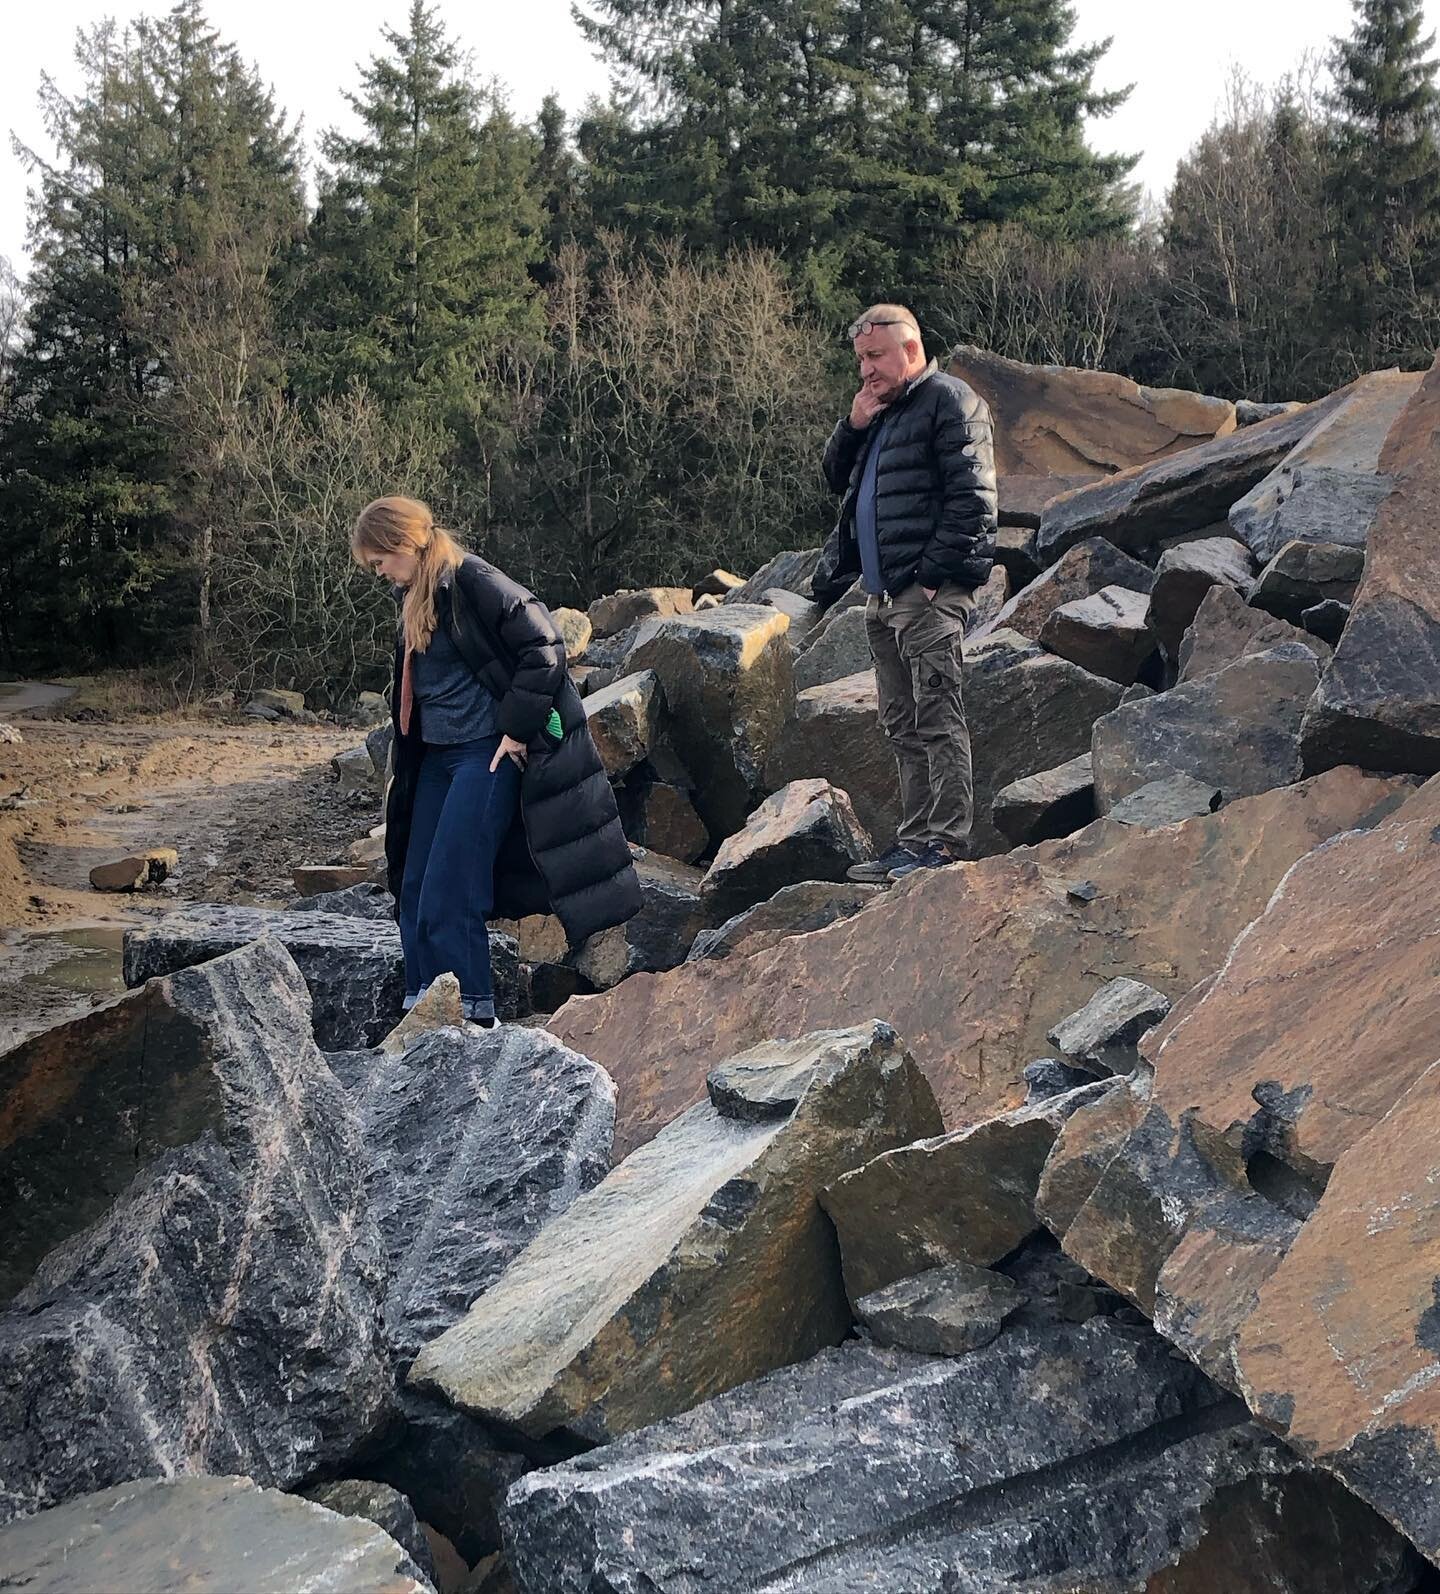 Today we went on a trip to the Paradis Bakkernes quarry on Bornholm with Flemming, FBN Stenhuggeri. We were looking for the right stone for a small fountain that we are making for a winter garden at a nursing home in &Ouml;rebro.
On the sunshine isla